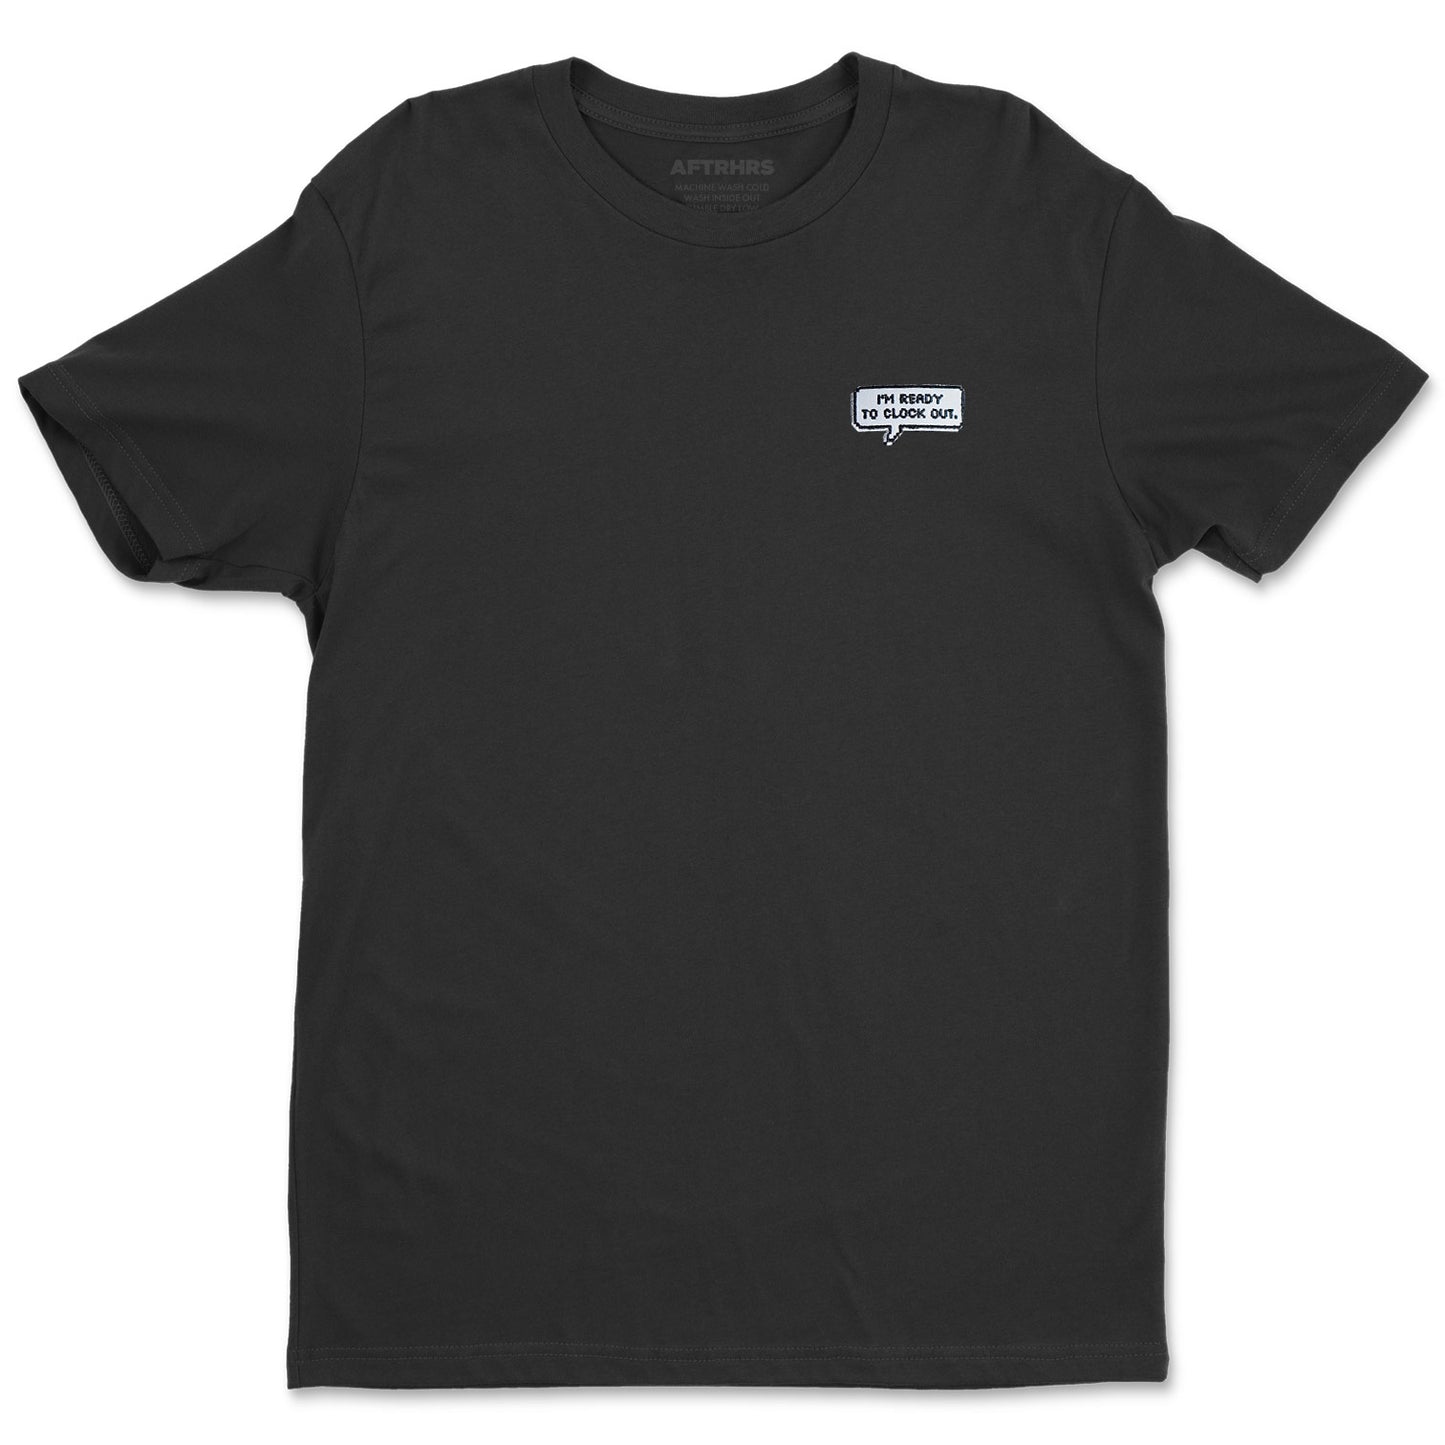 Ready To Clock Out Shirt - Black